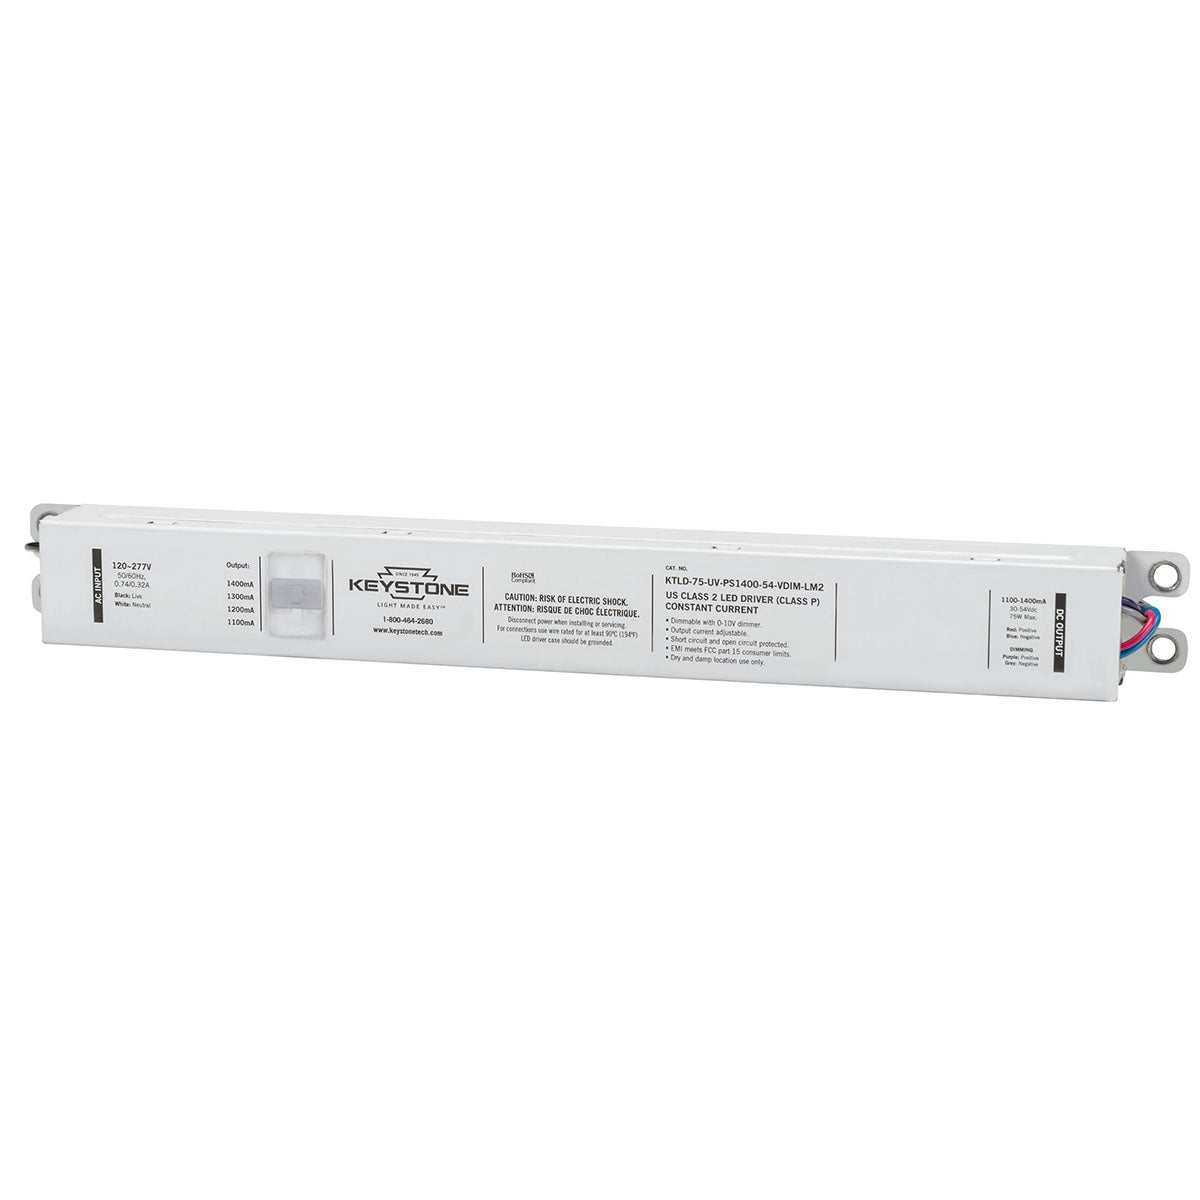 Power Select LED Driver, 75W, Adjustable Constant Current 1100-1400mA, 0-10V Dimming, 120-277V Input - Bees Lighting